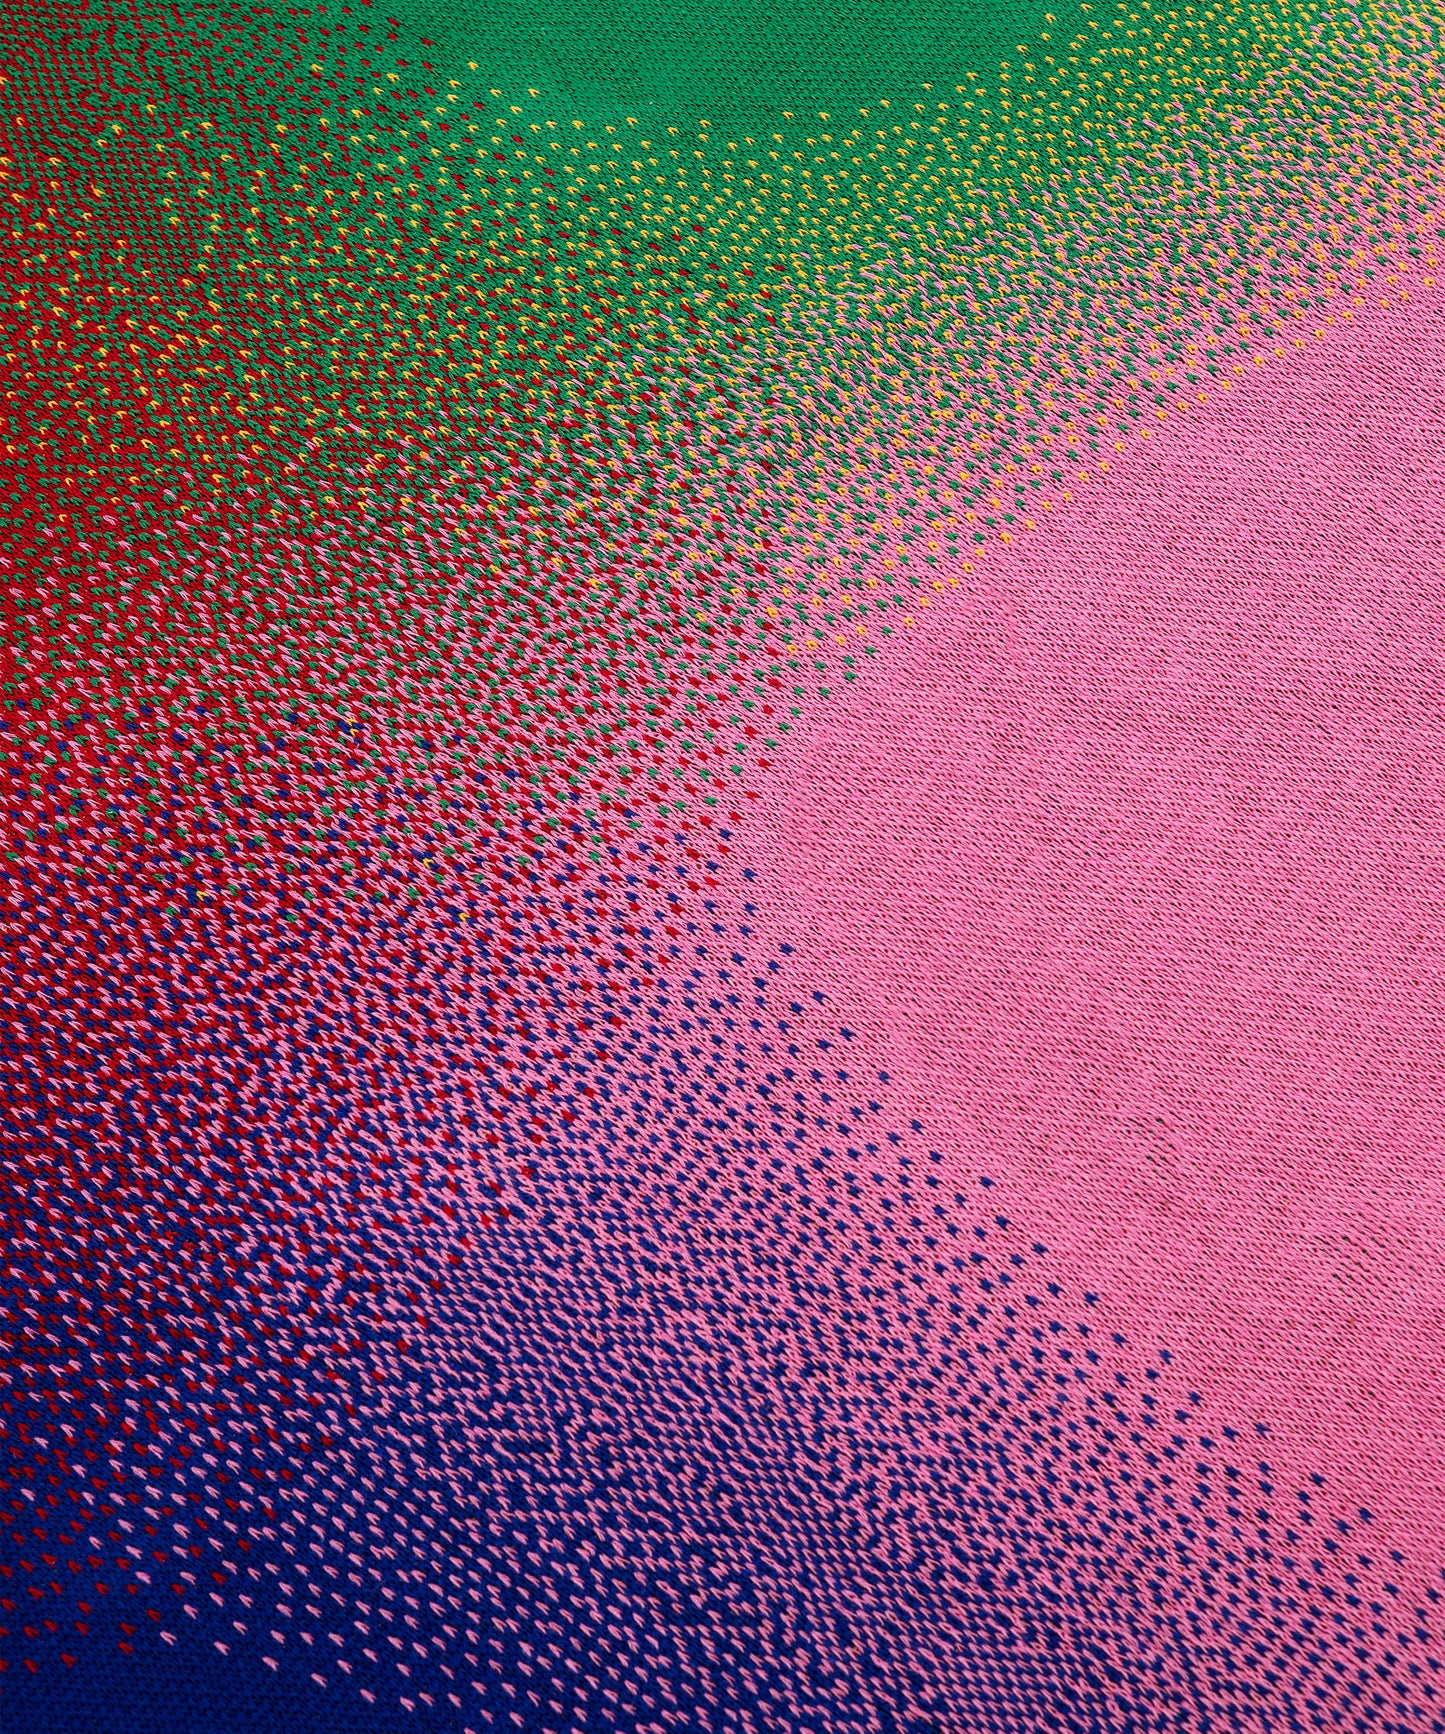 Close up of Aura Blanket showing knit details with all 5 colors- Red, yellow, blue, pink, green.